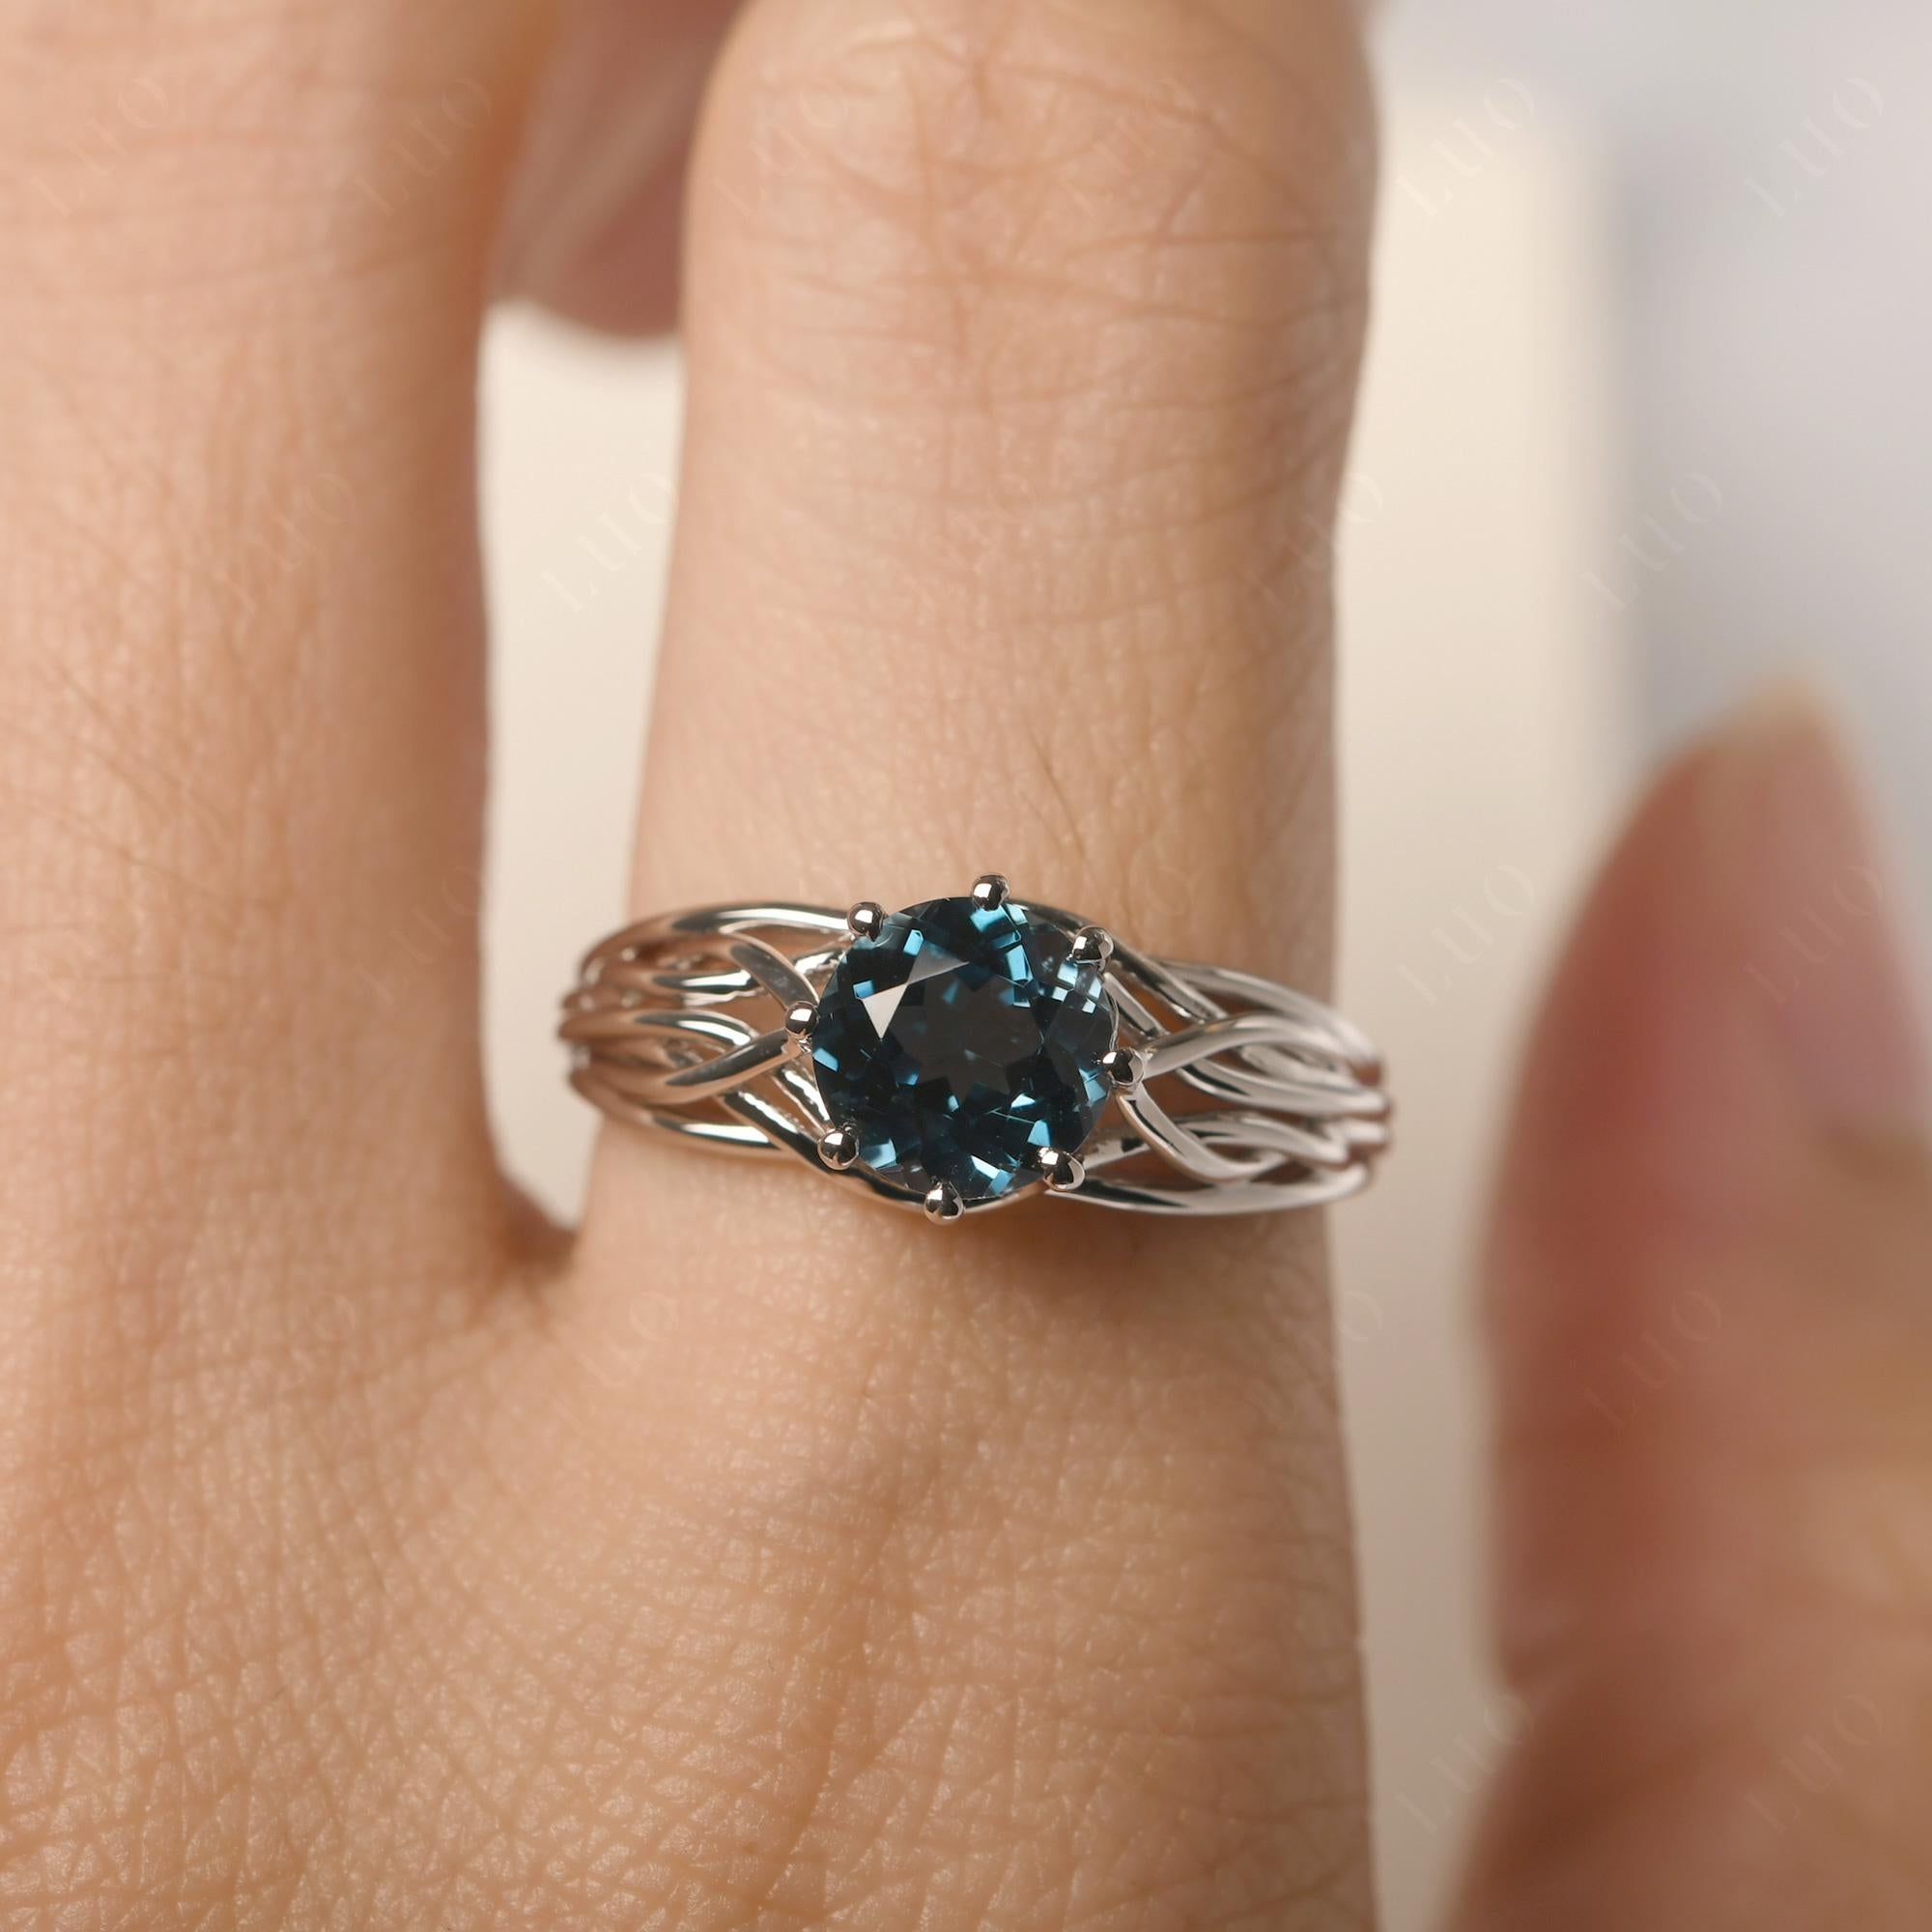 Intertwined London Blue Topaz Wedding Ring - LUO Jewelry